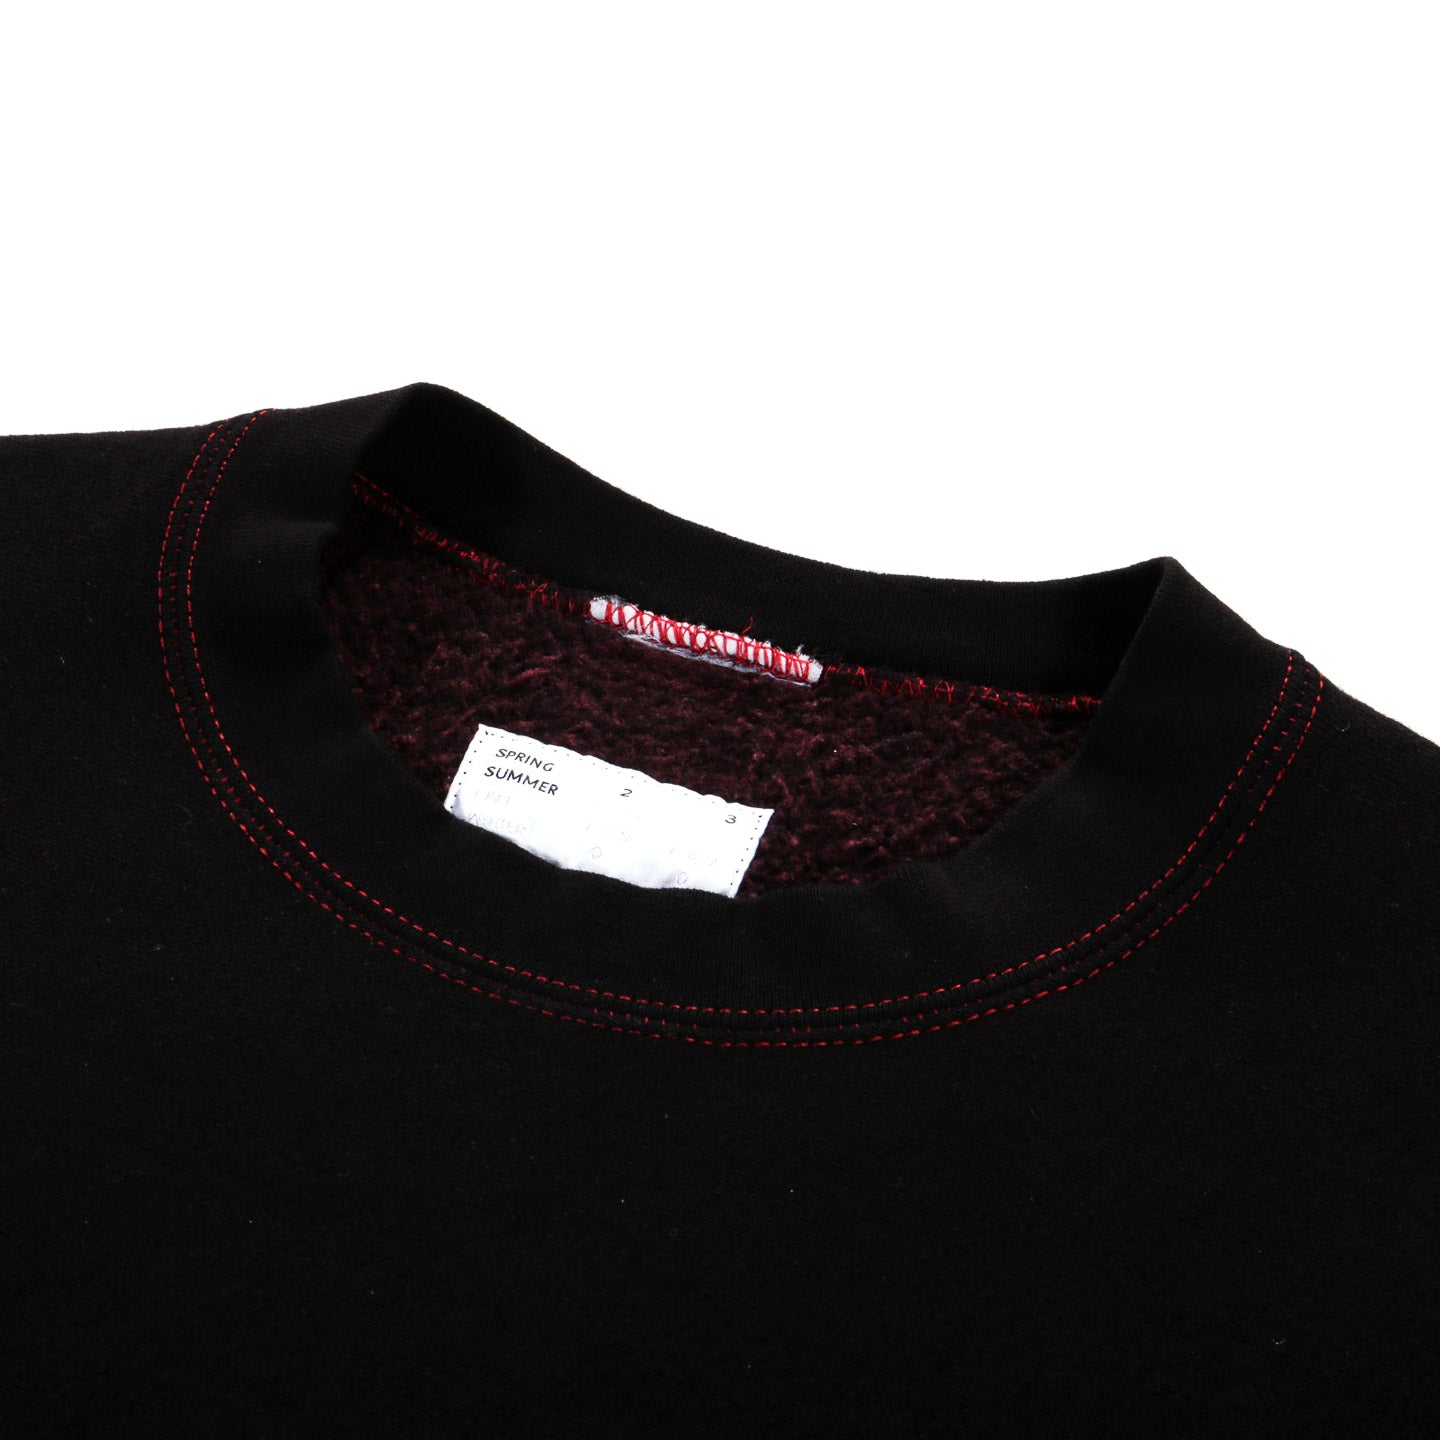 4SDESIGNS RECYCLED SIZE TAG ECO CREWNECK BLACK OVERDYE - L(A)